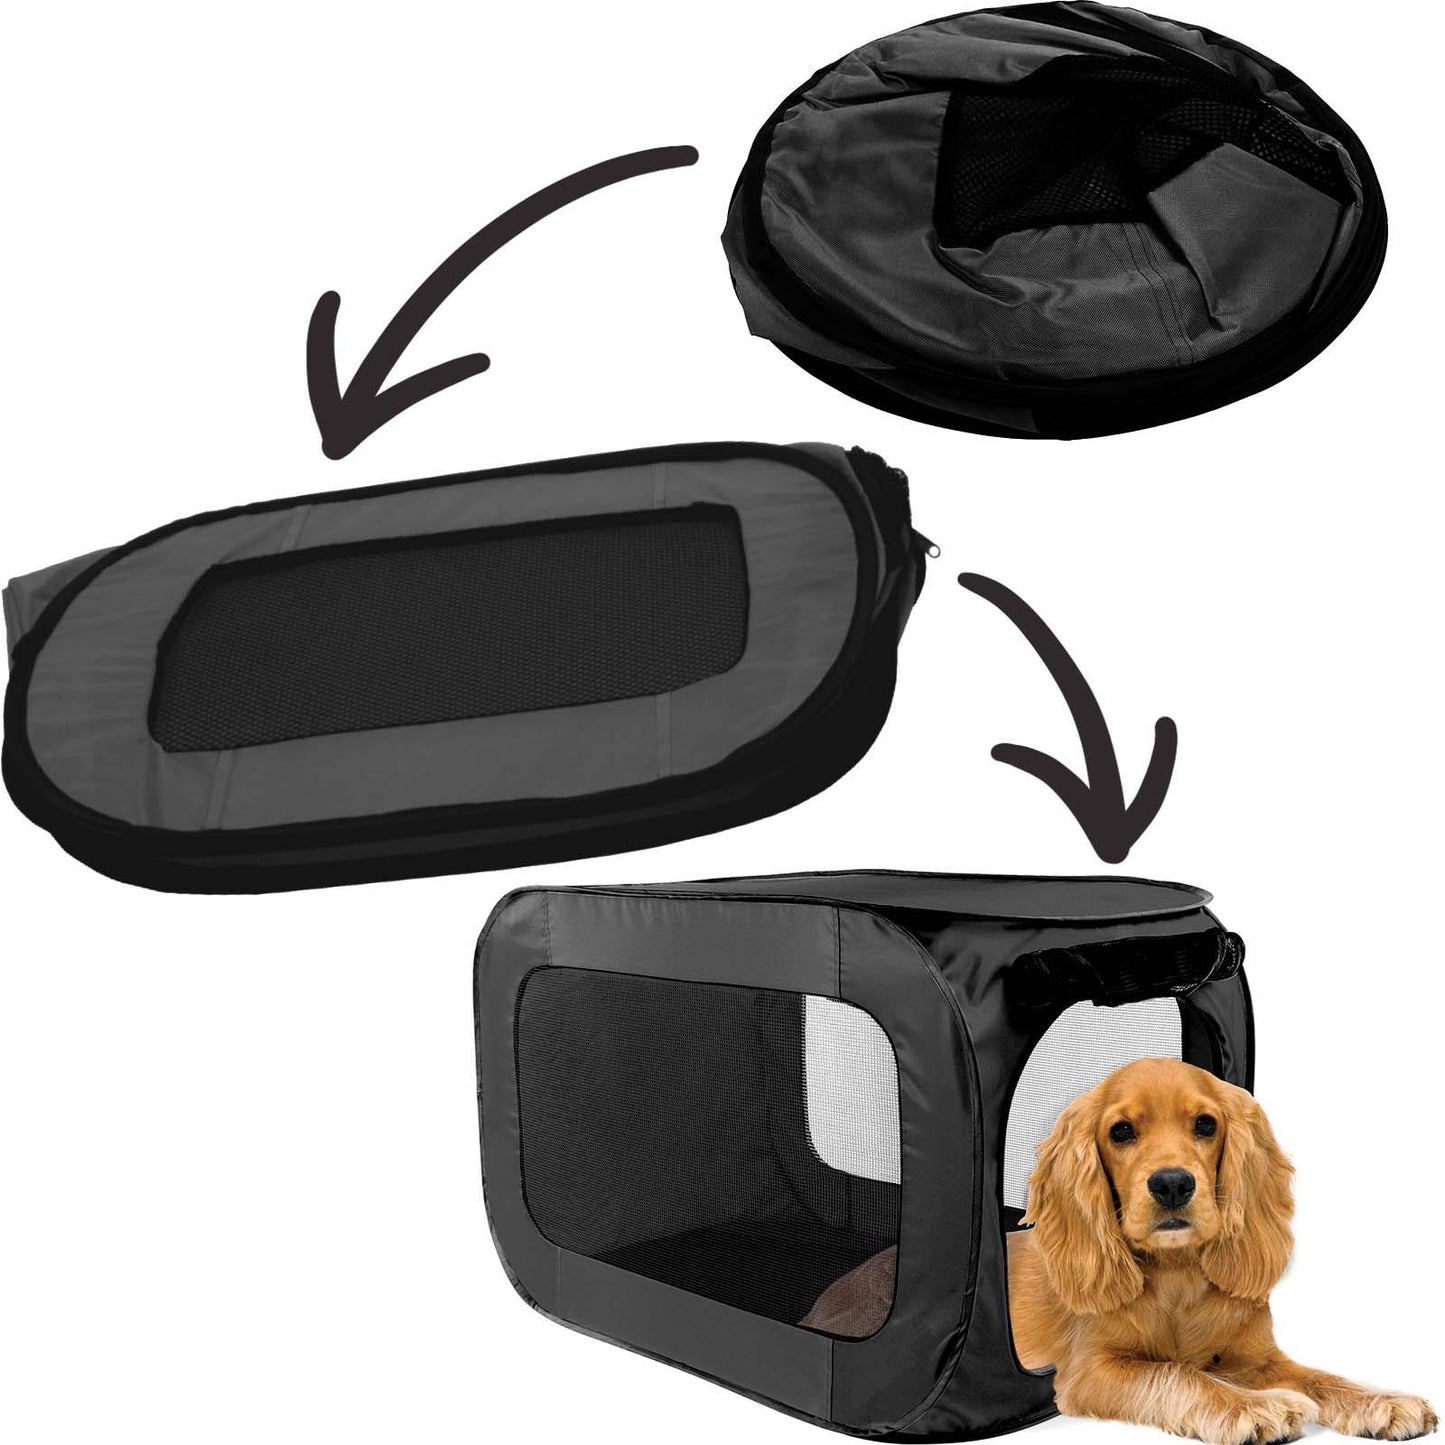 Collapsible Travel Cage For Dogs & Cats Nylon Black Or Green